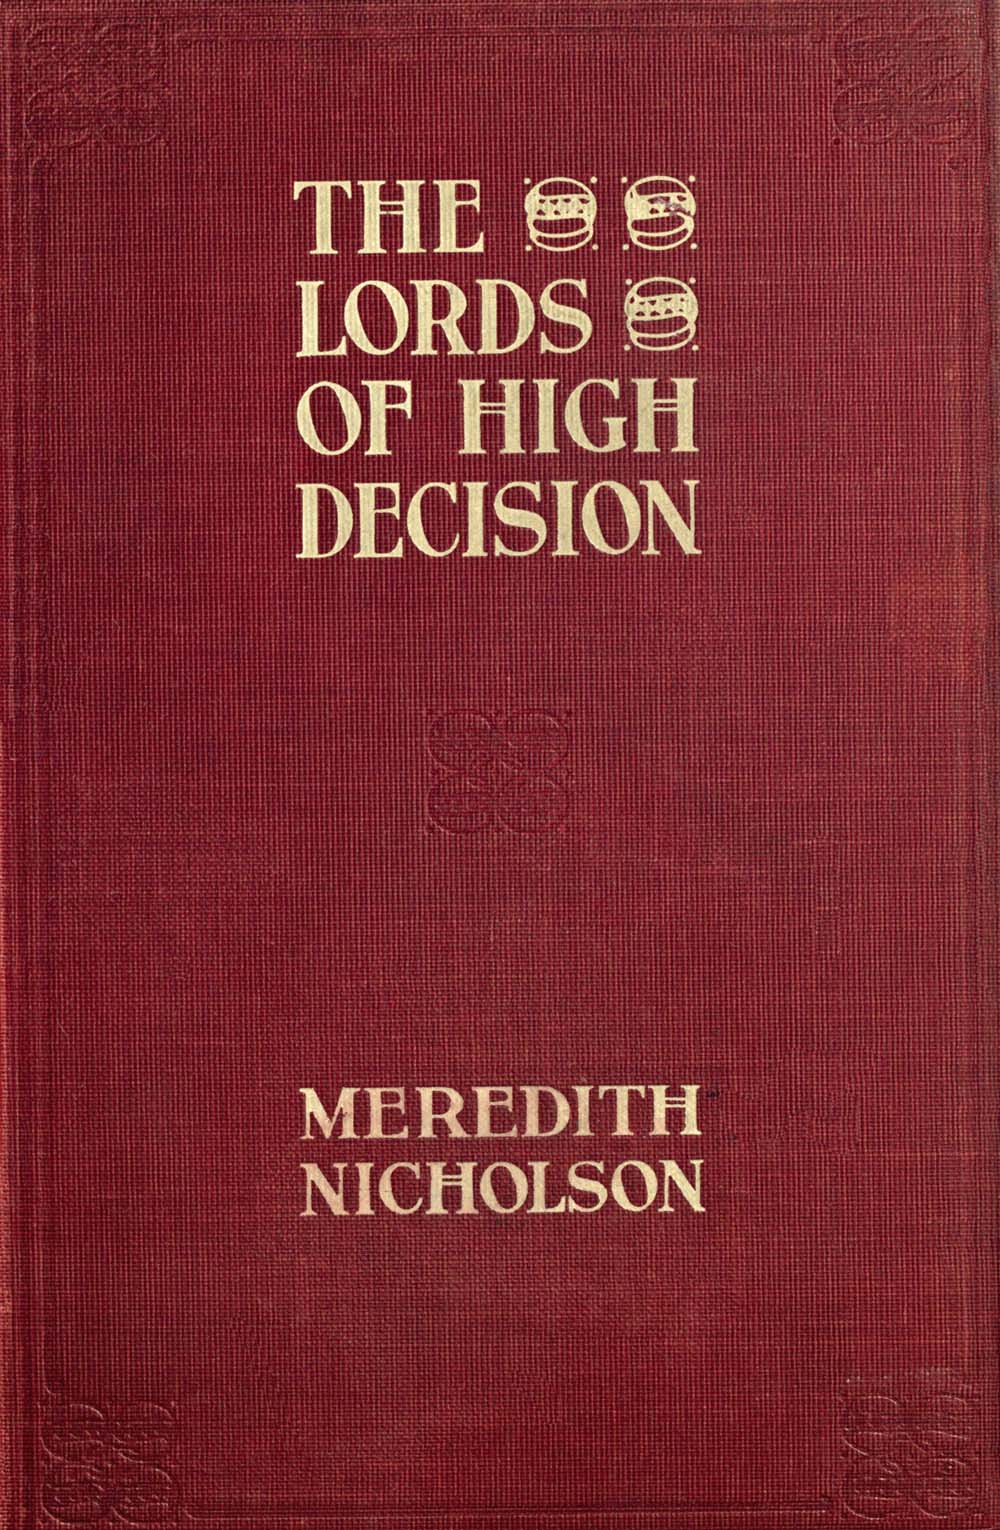 The Lords of High Decision, by Meredith Nicholson—A Project Gutenberg eBook picture